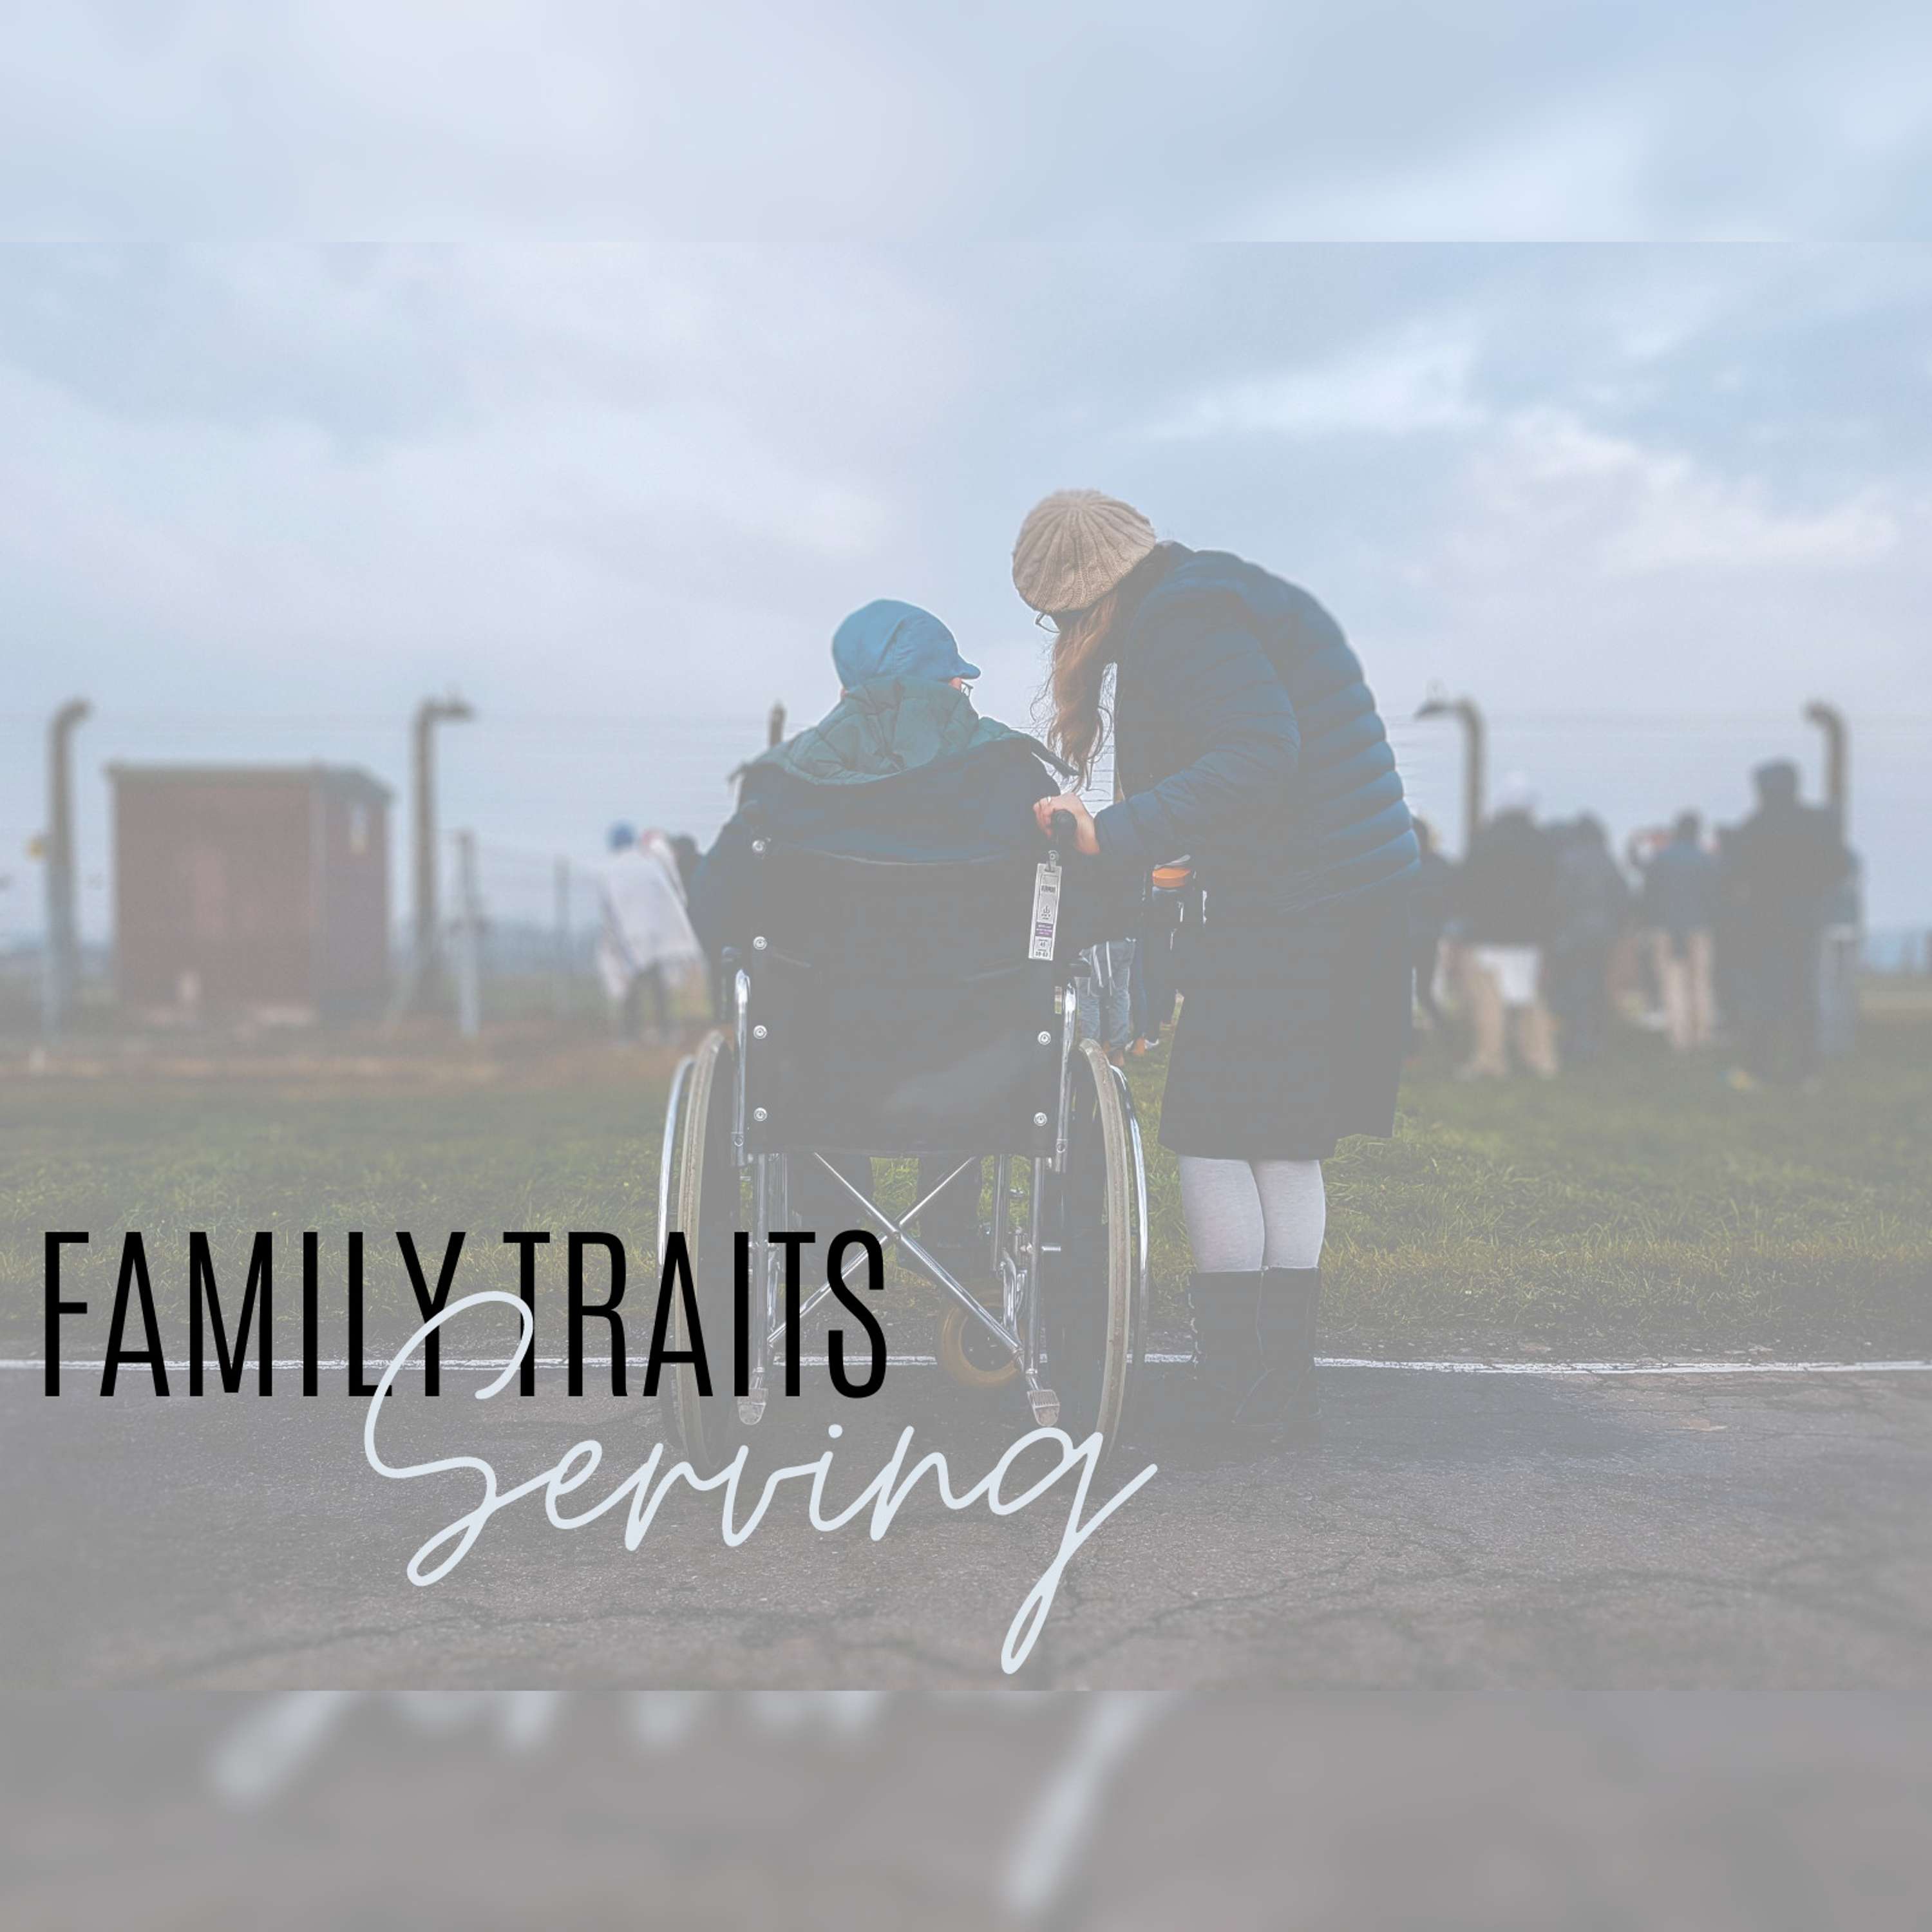 Family Traits Week 4 | Serving